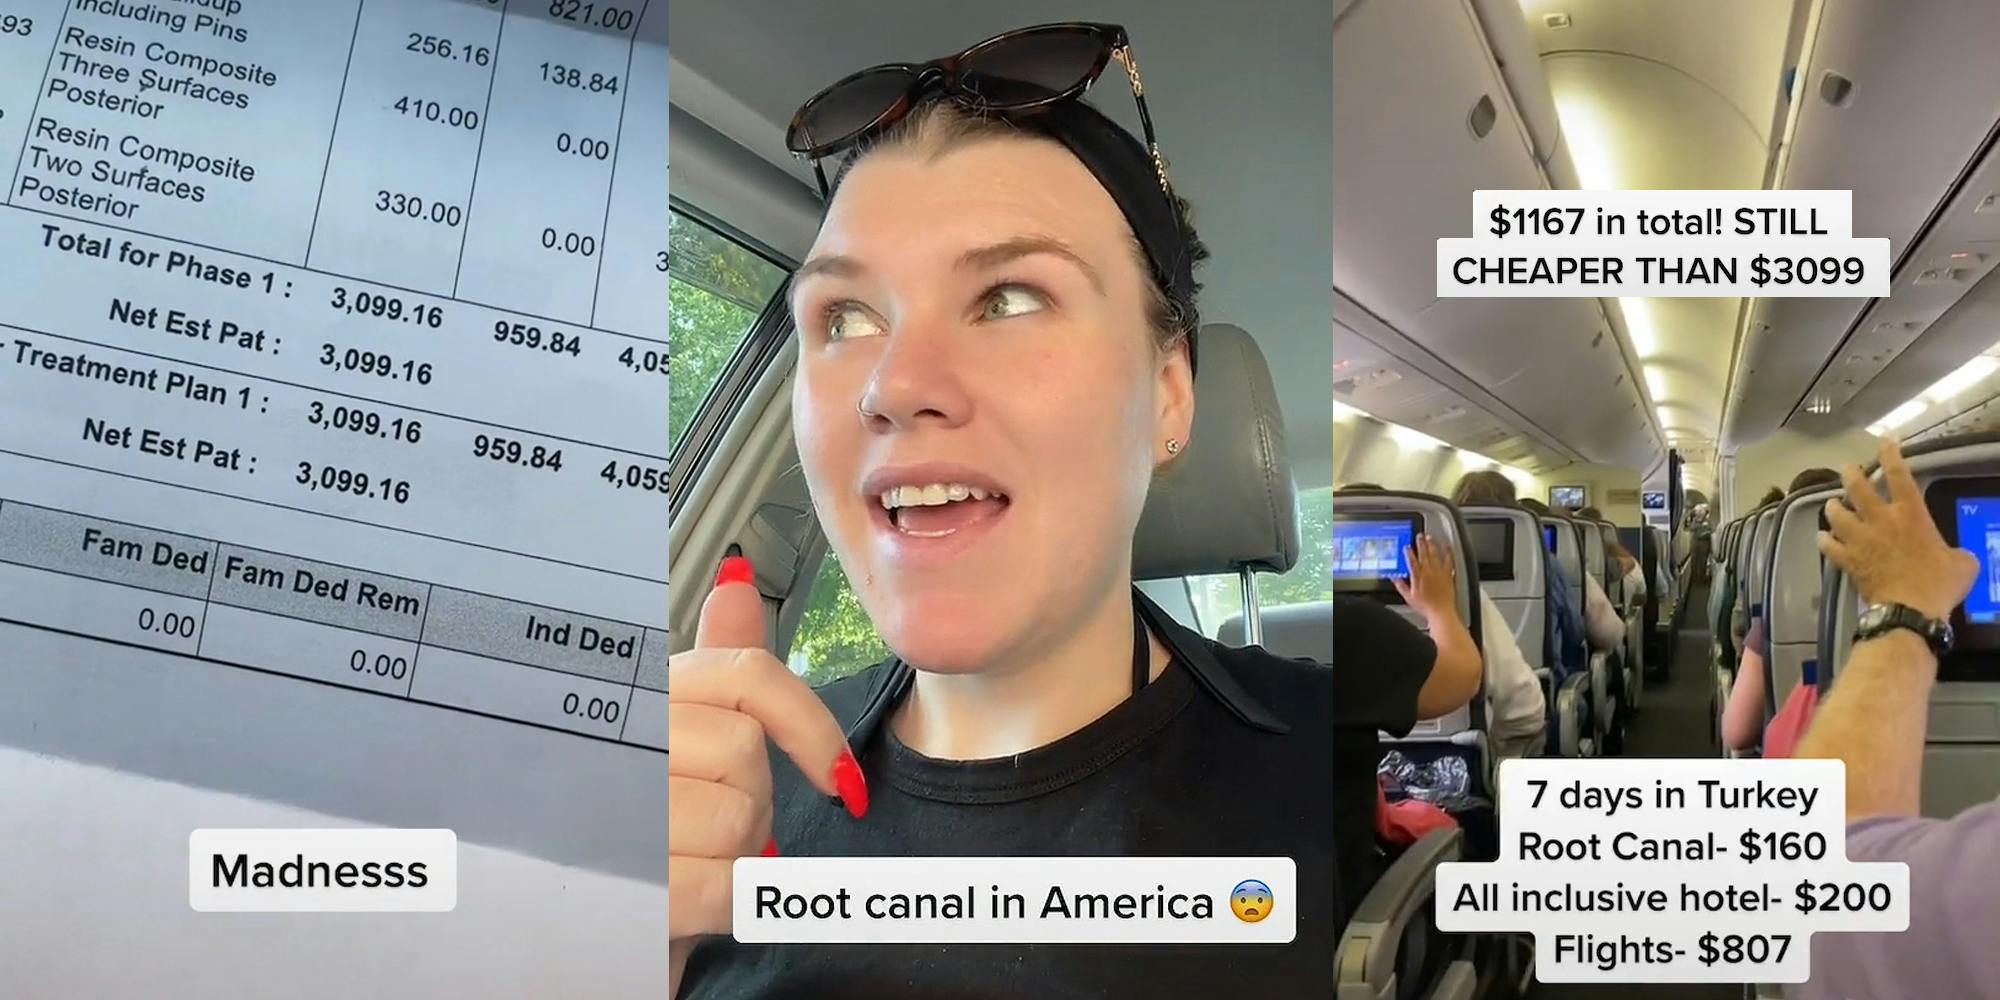 ‘American health system is a joke’: TikToker flies to Turkey to avoid paying over $3000 for a root canal in the U.S.